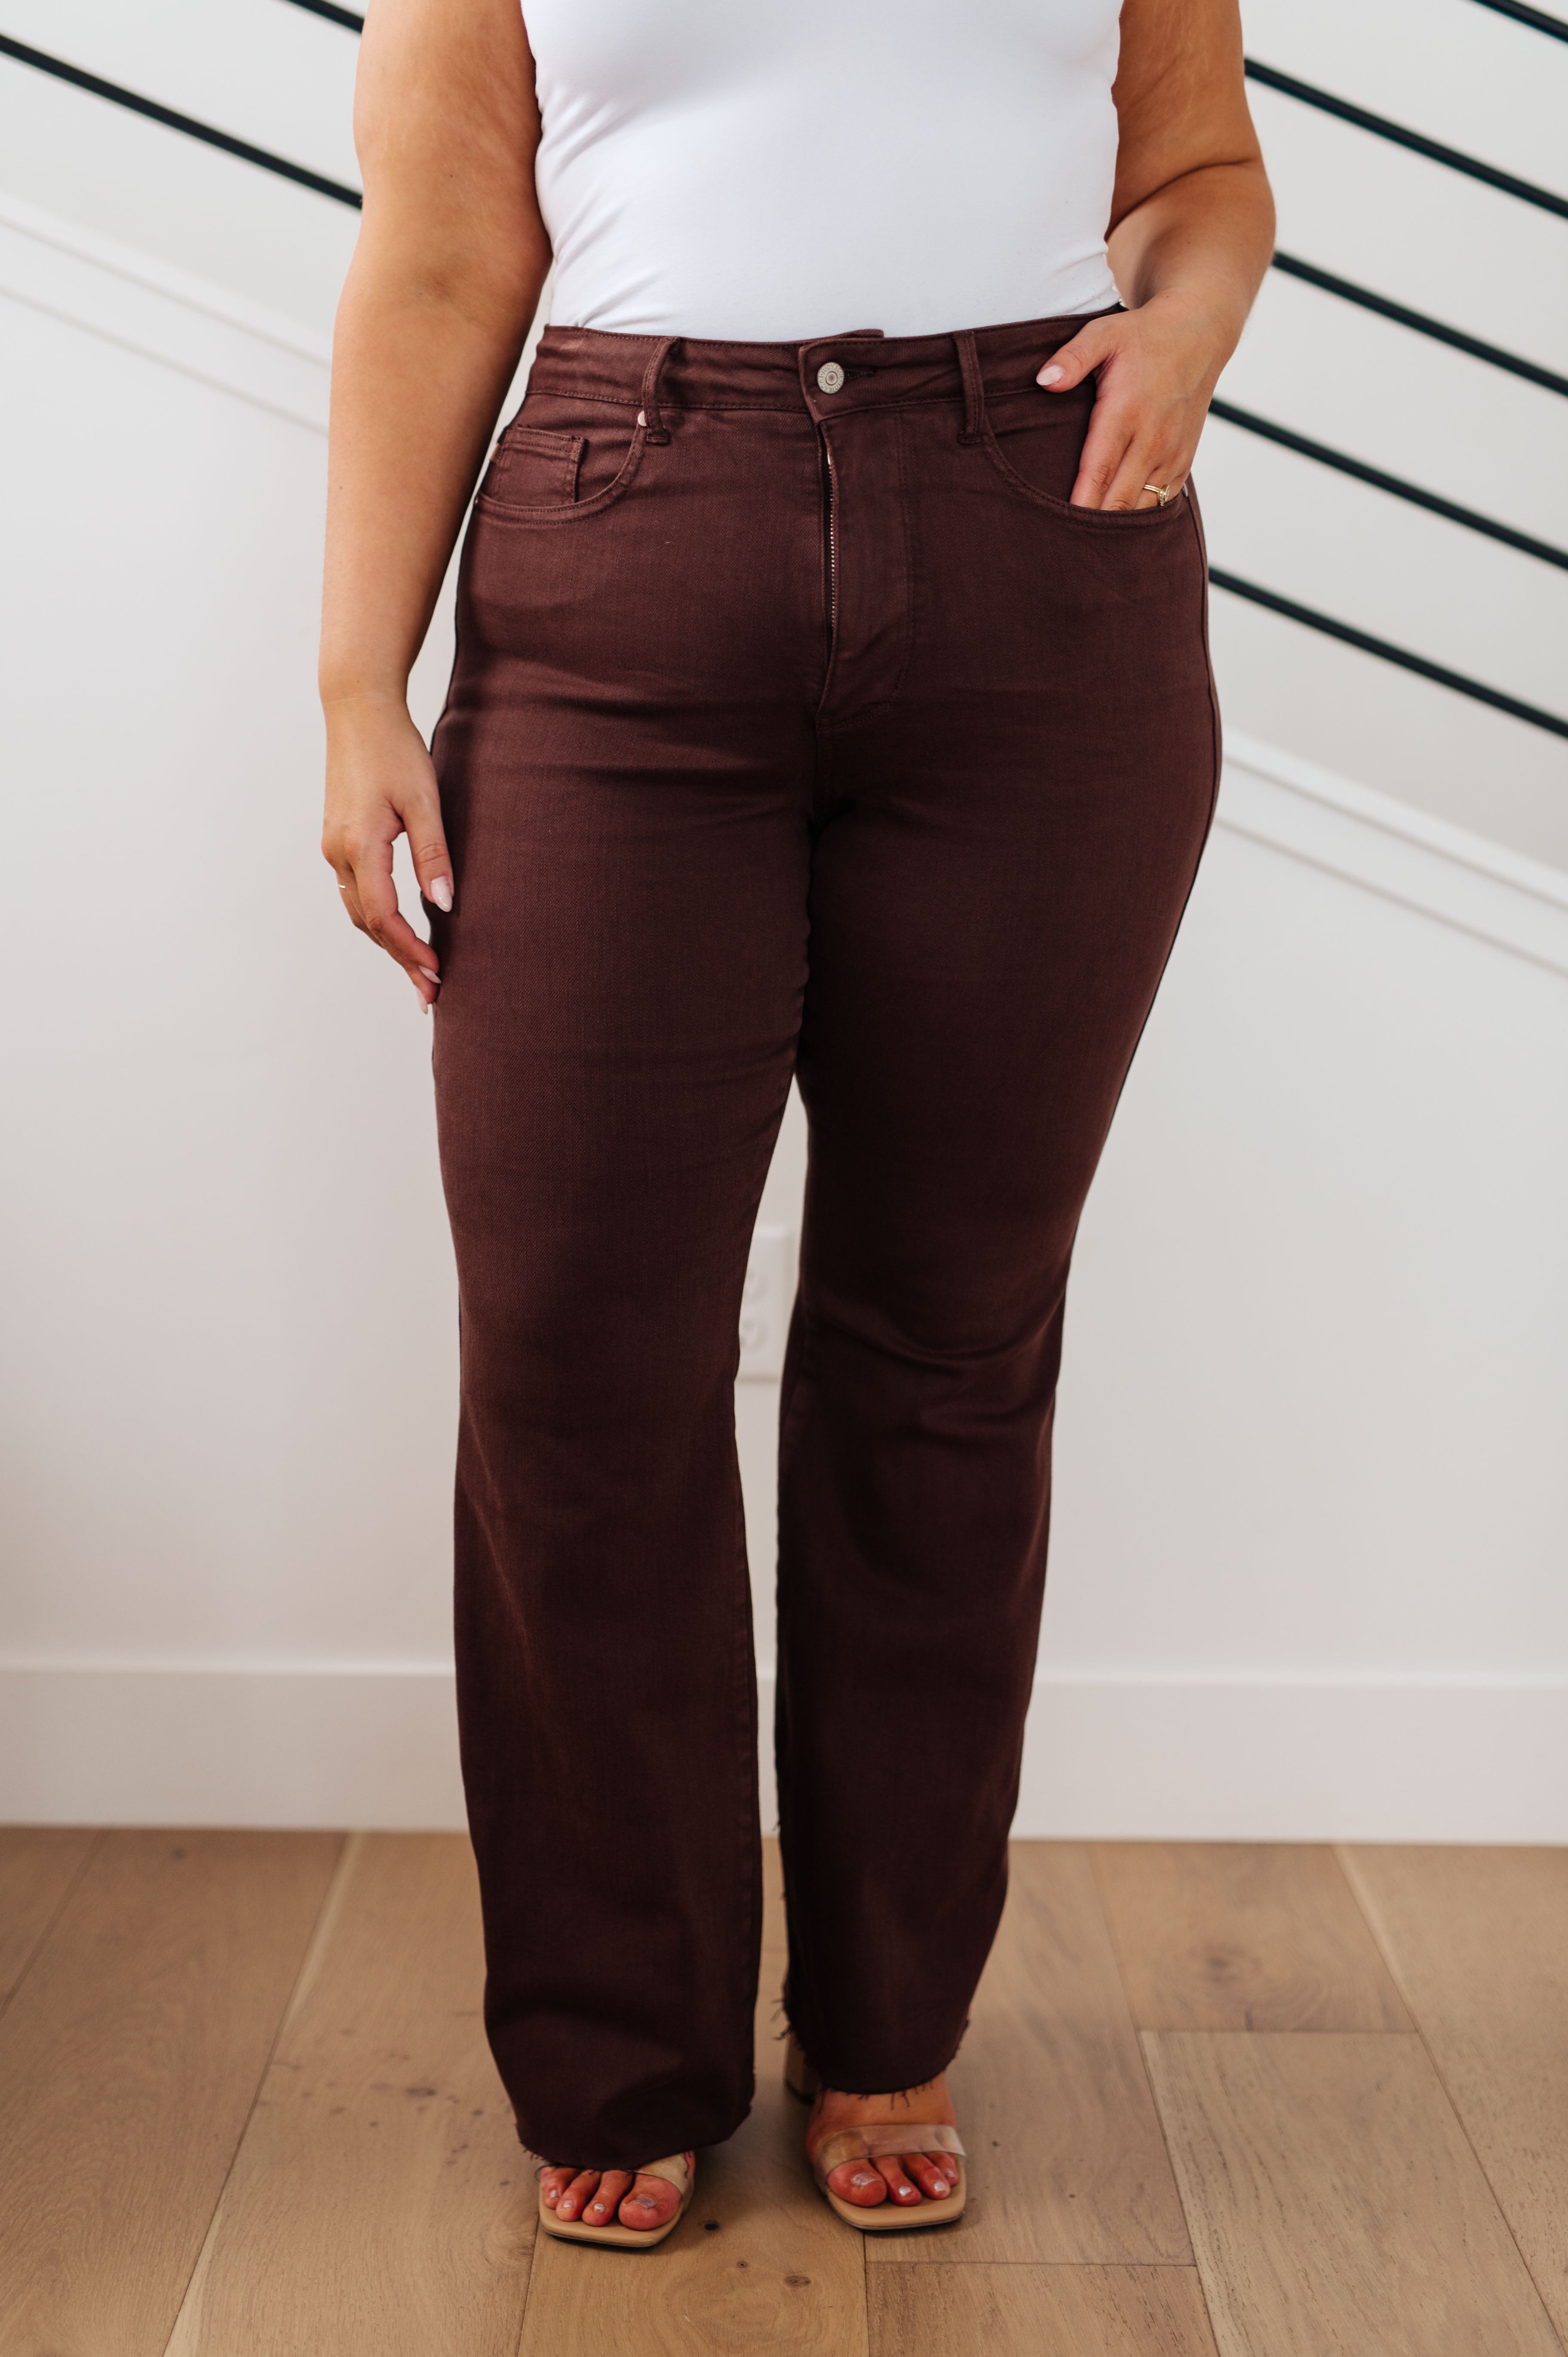 Judy Blue Sienna High Rise Tummy Control Top Flare Jeans in Espresso Ave Shops 10-17-23